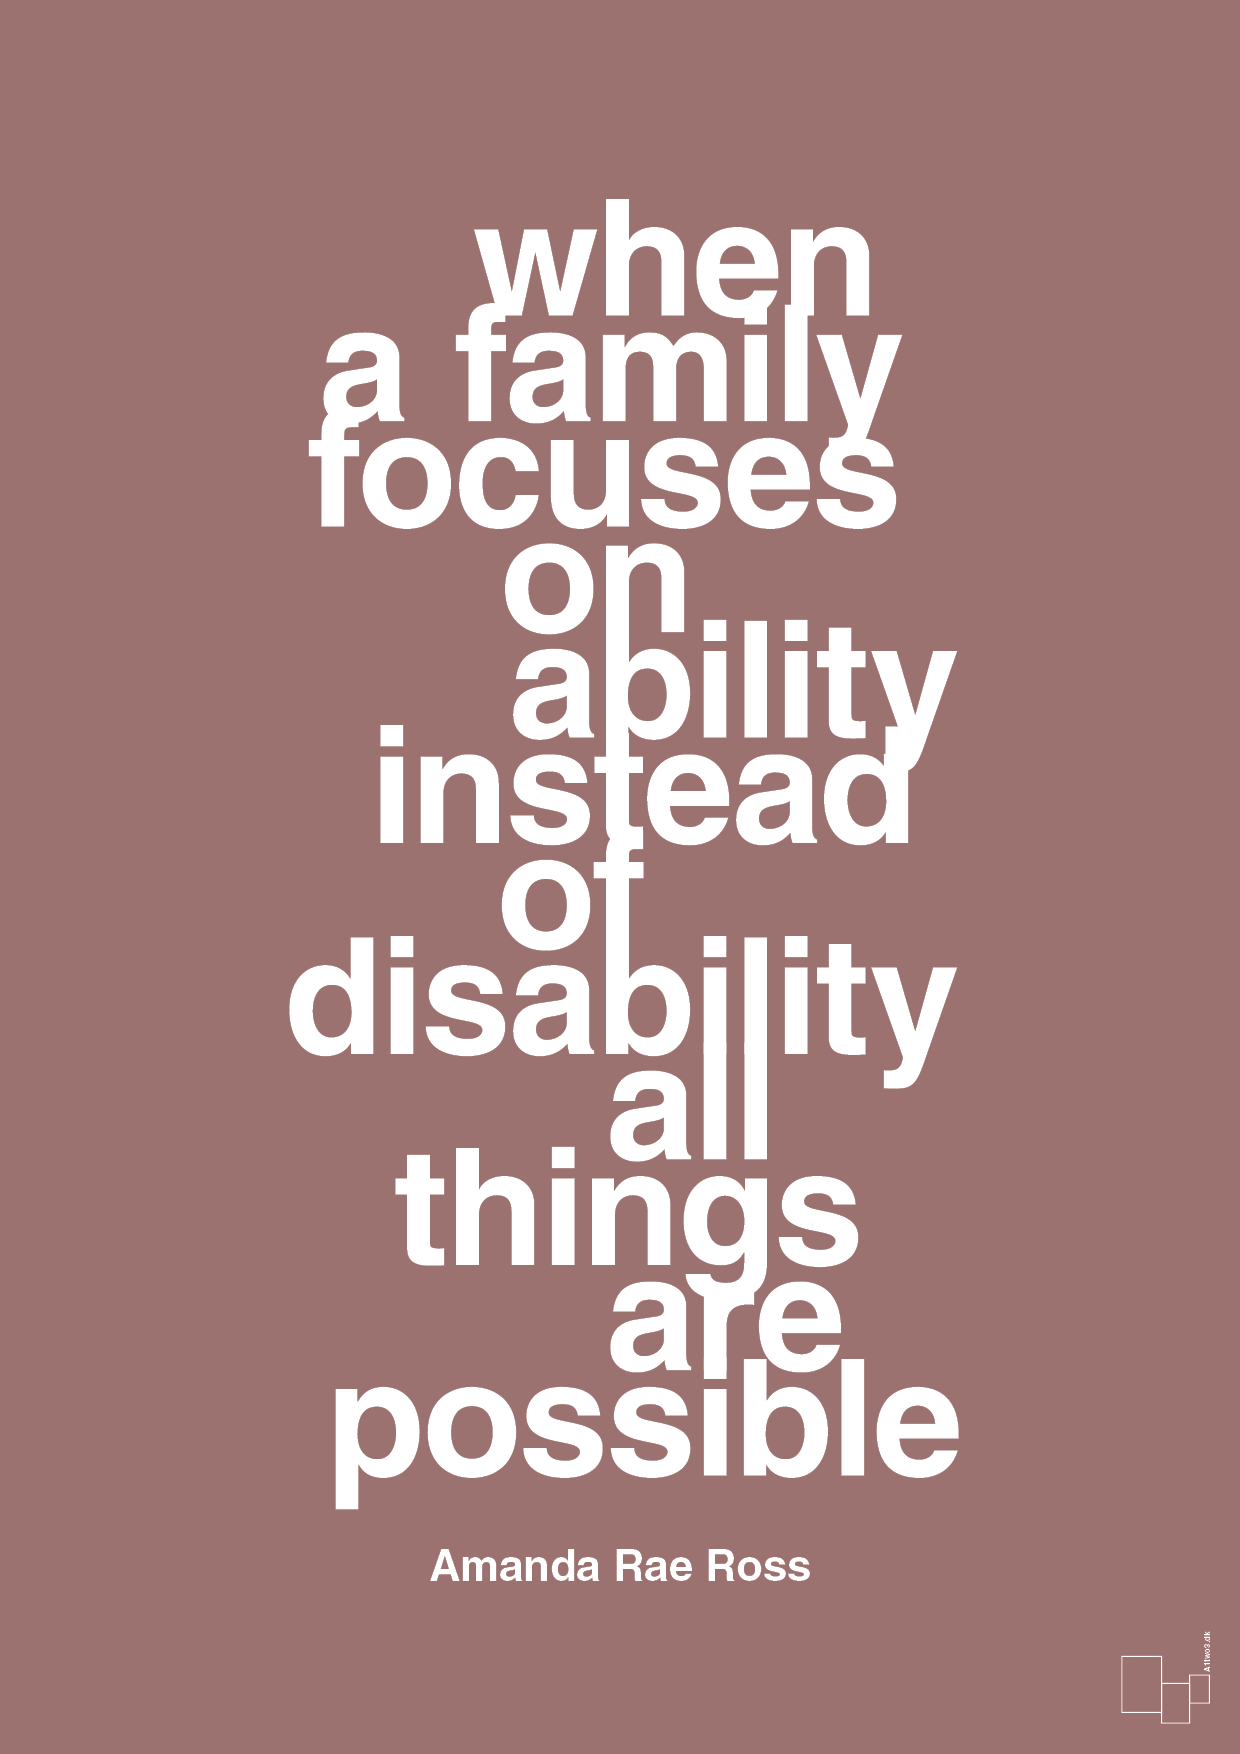 when a family focuses on ability instead of disability all things are possible - Plakat med Samfund i Plum